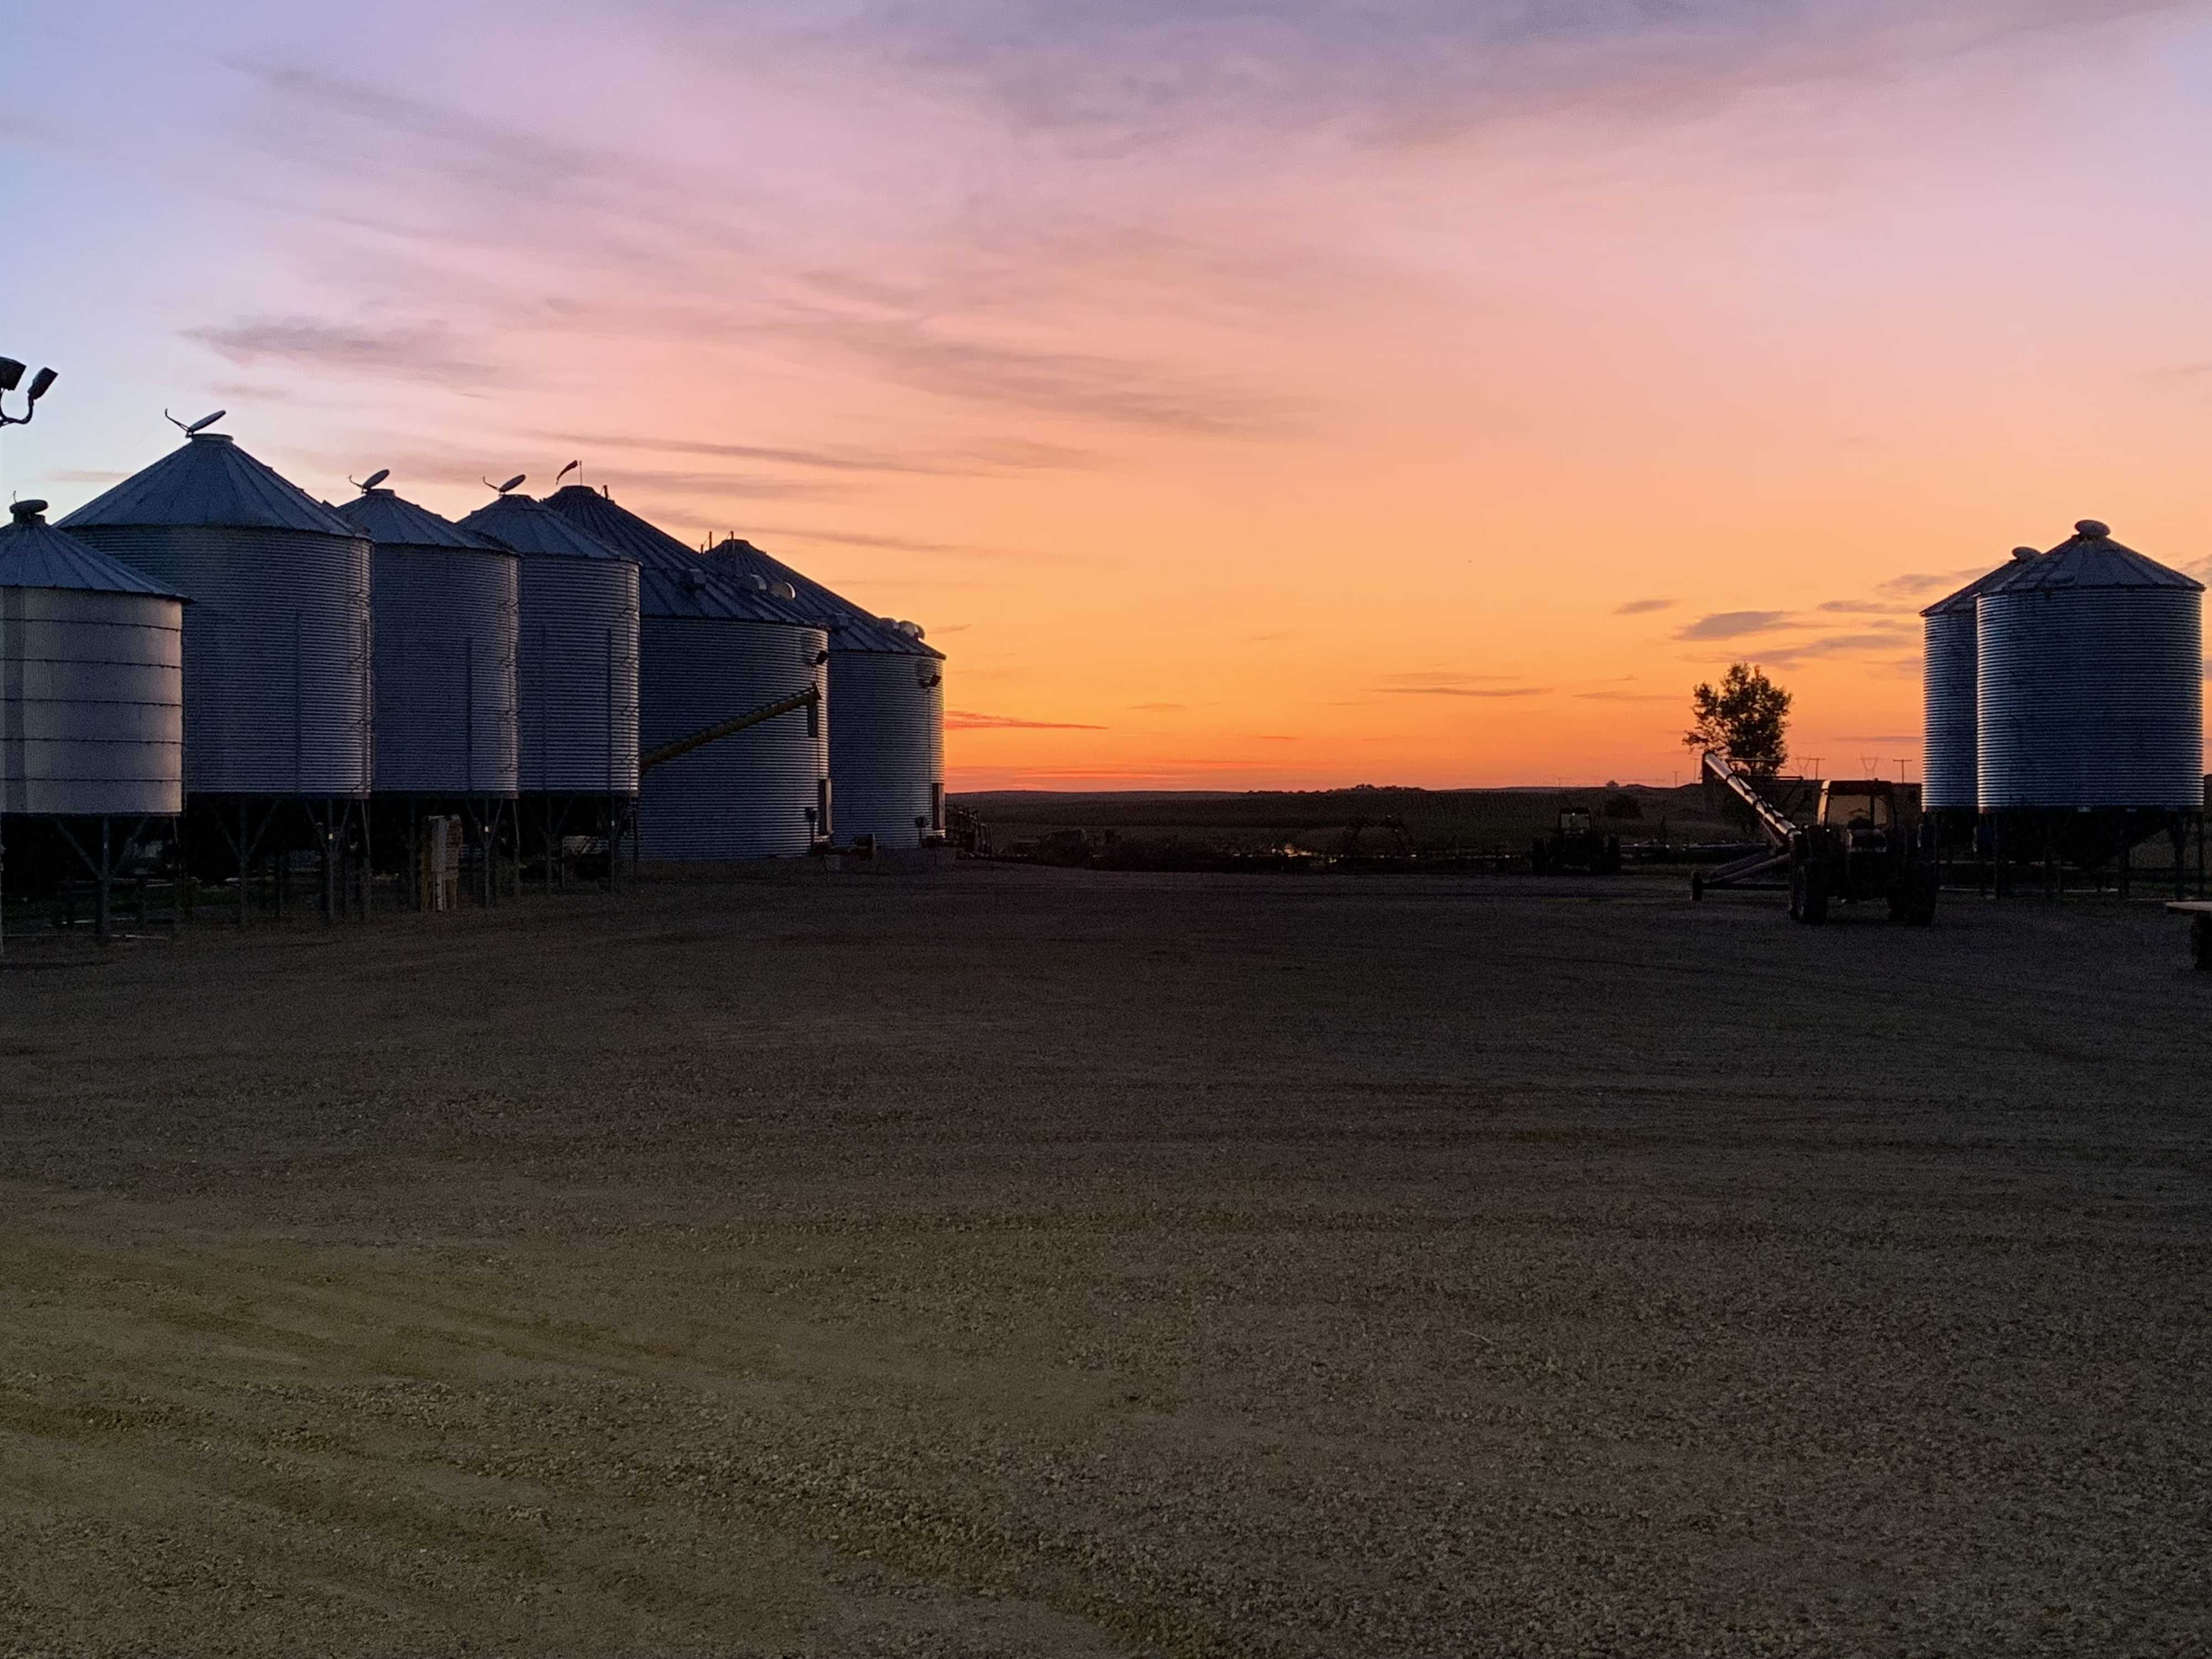 Mid-morning Ag News, April 23, 2021: Study shows impact of eliminating stepped-up basis tax provision